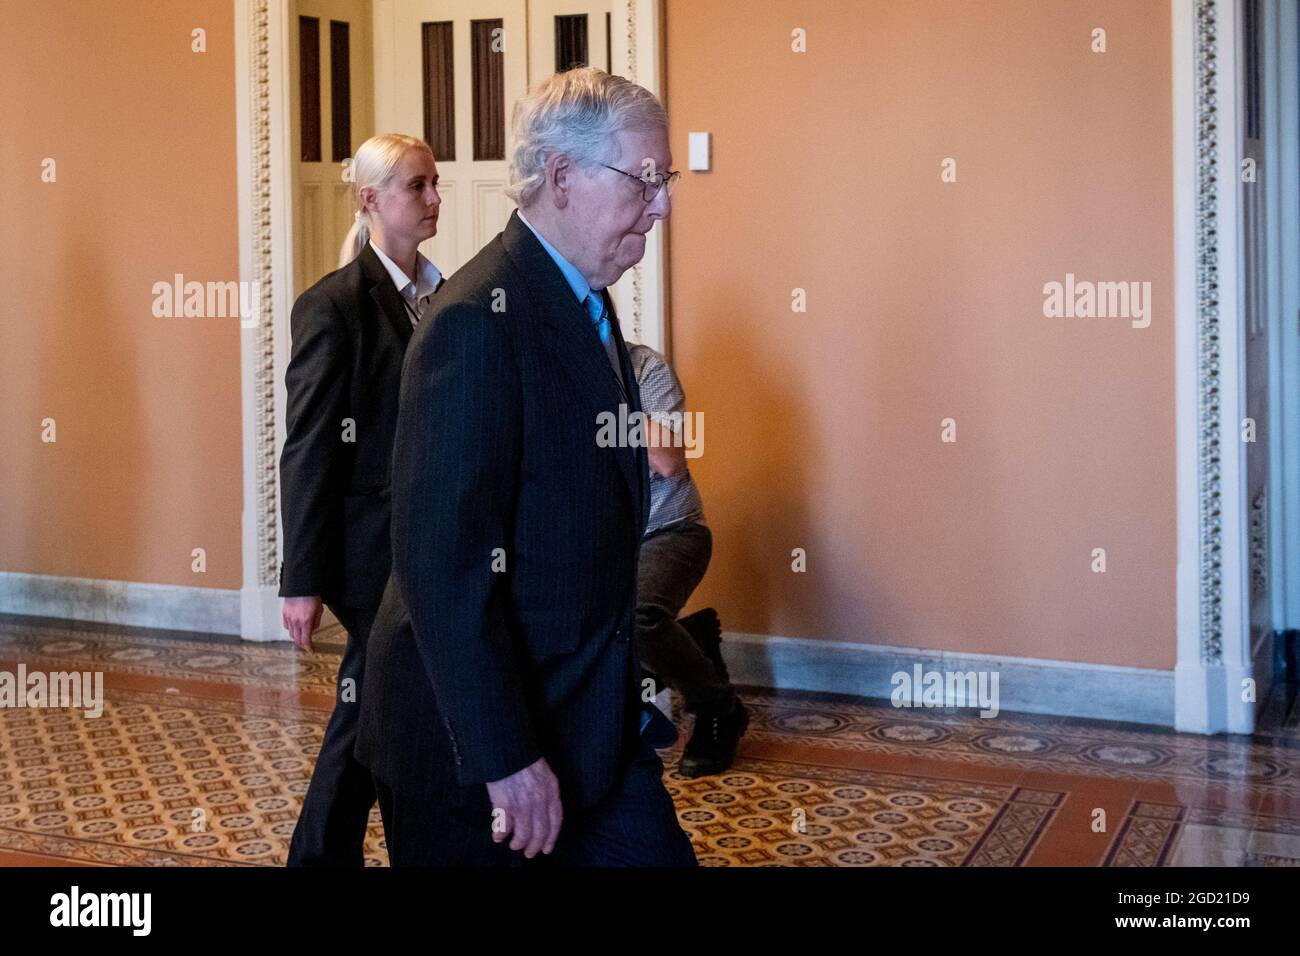 Washington, United States Of America. 10th Aug, 2021. United States Senate Minority Leader Mitch McConnell (Republican of Kentucky) arrives at the US Capitol in Washington, DC, Tuesday, August 10, 2021. The Senate is expected to vote today on final passage of the bipartisan $1 trillion H.R. 3684, Infrastructure Investment and Jobs Act. Credit: Rod Lamkey/CNP Photo via Credit: Newscom/Alamy Live News Stock Photo